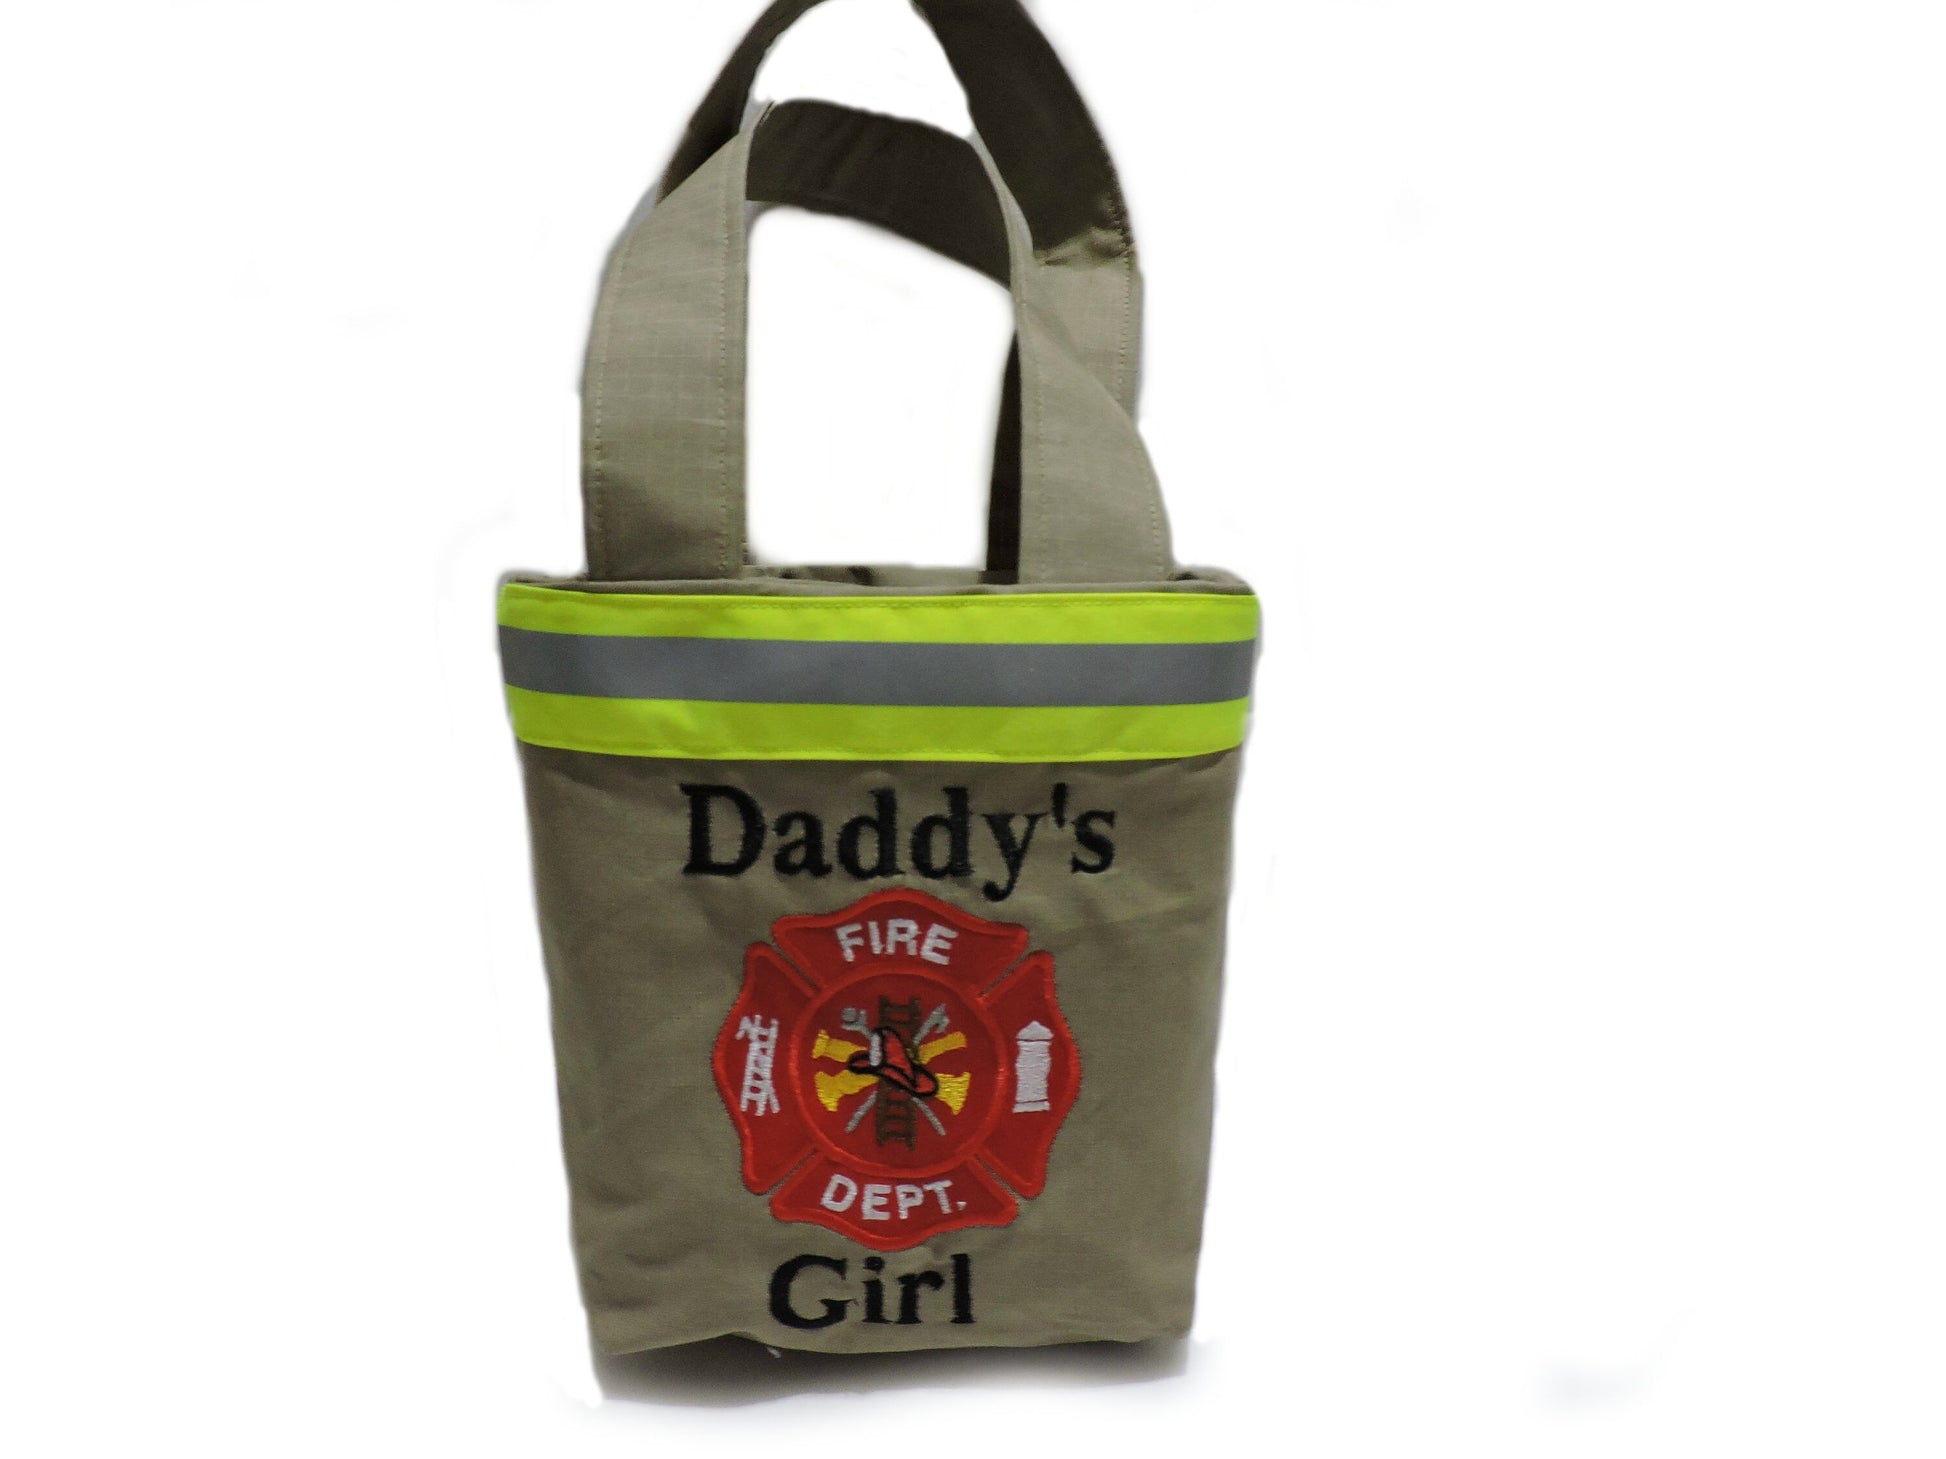 Firefighter Toddler Purse - daddy's girl saying